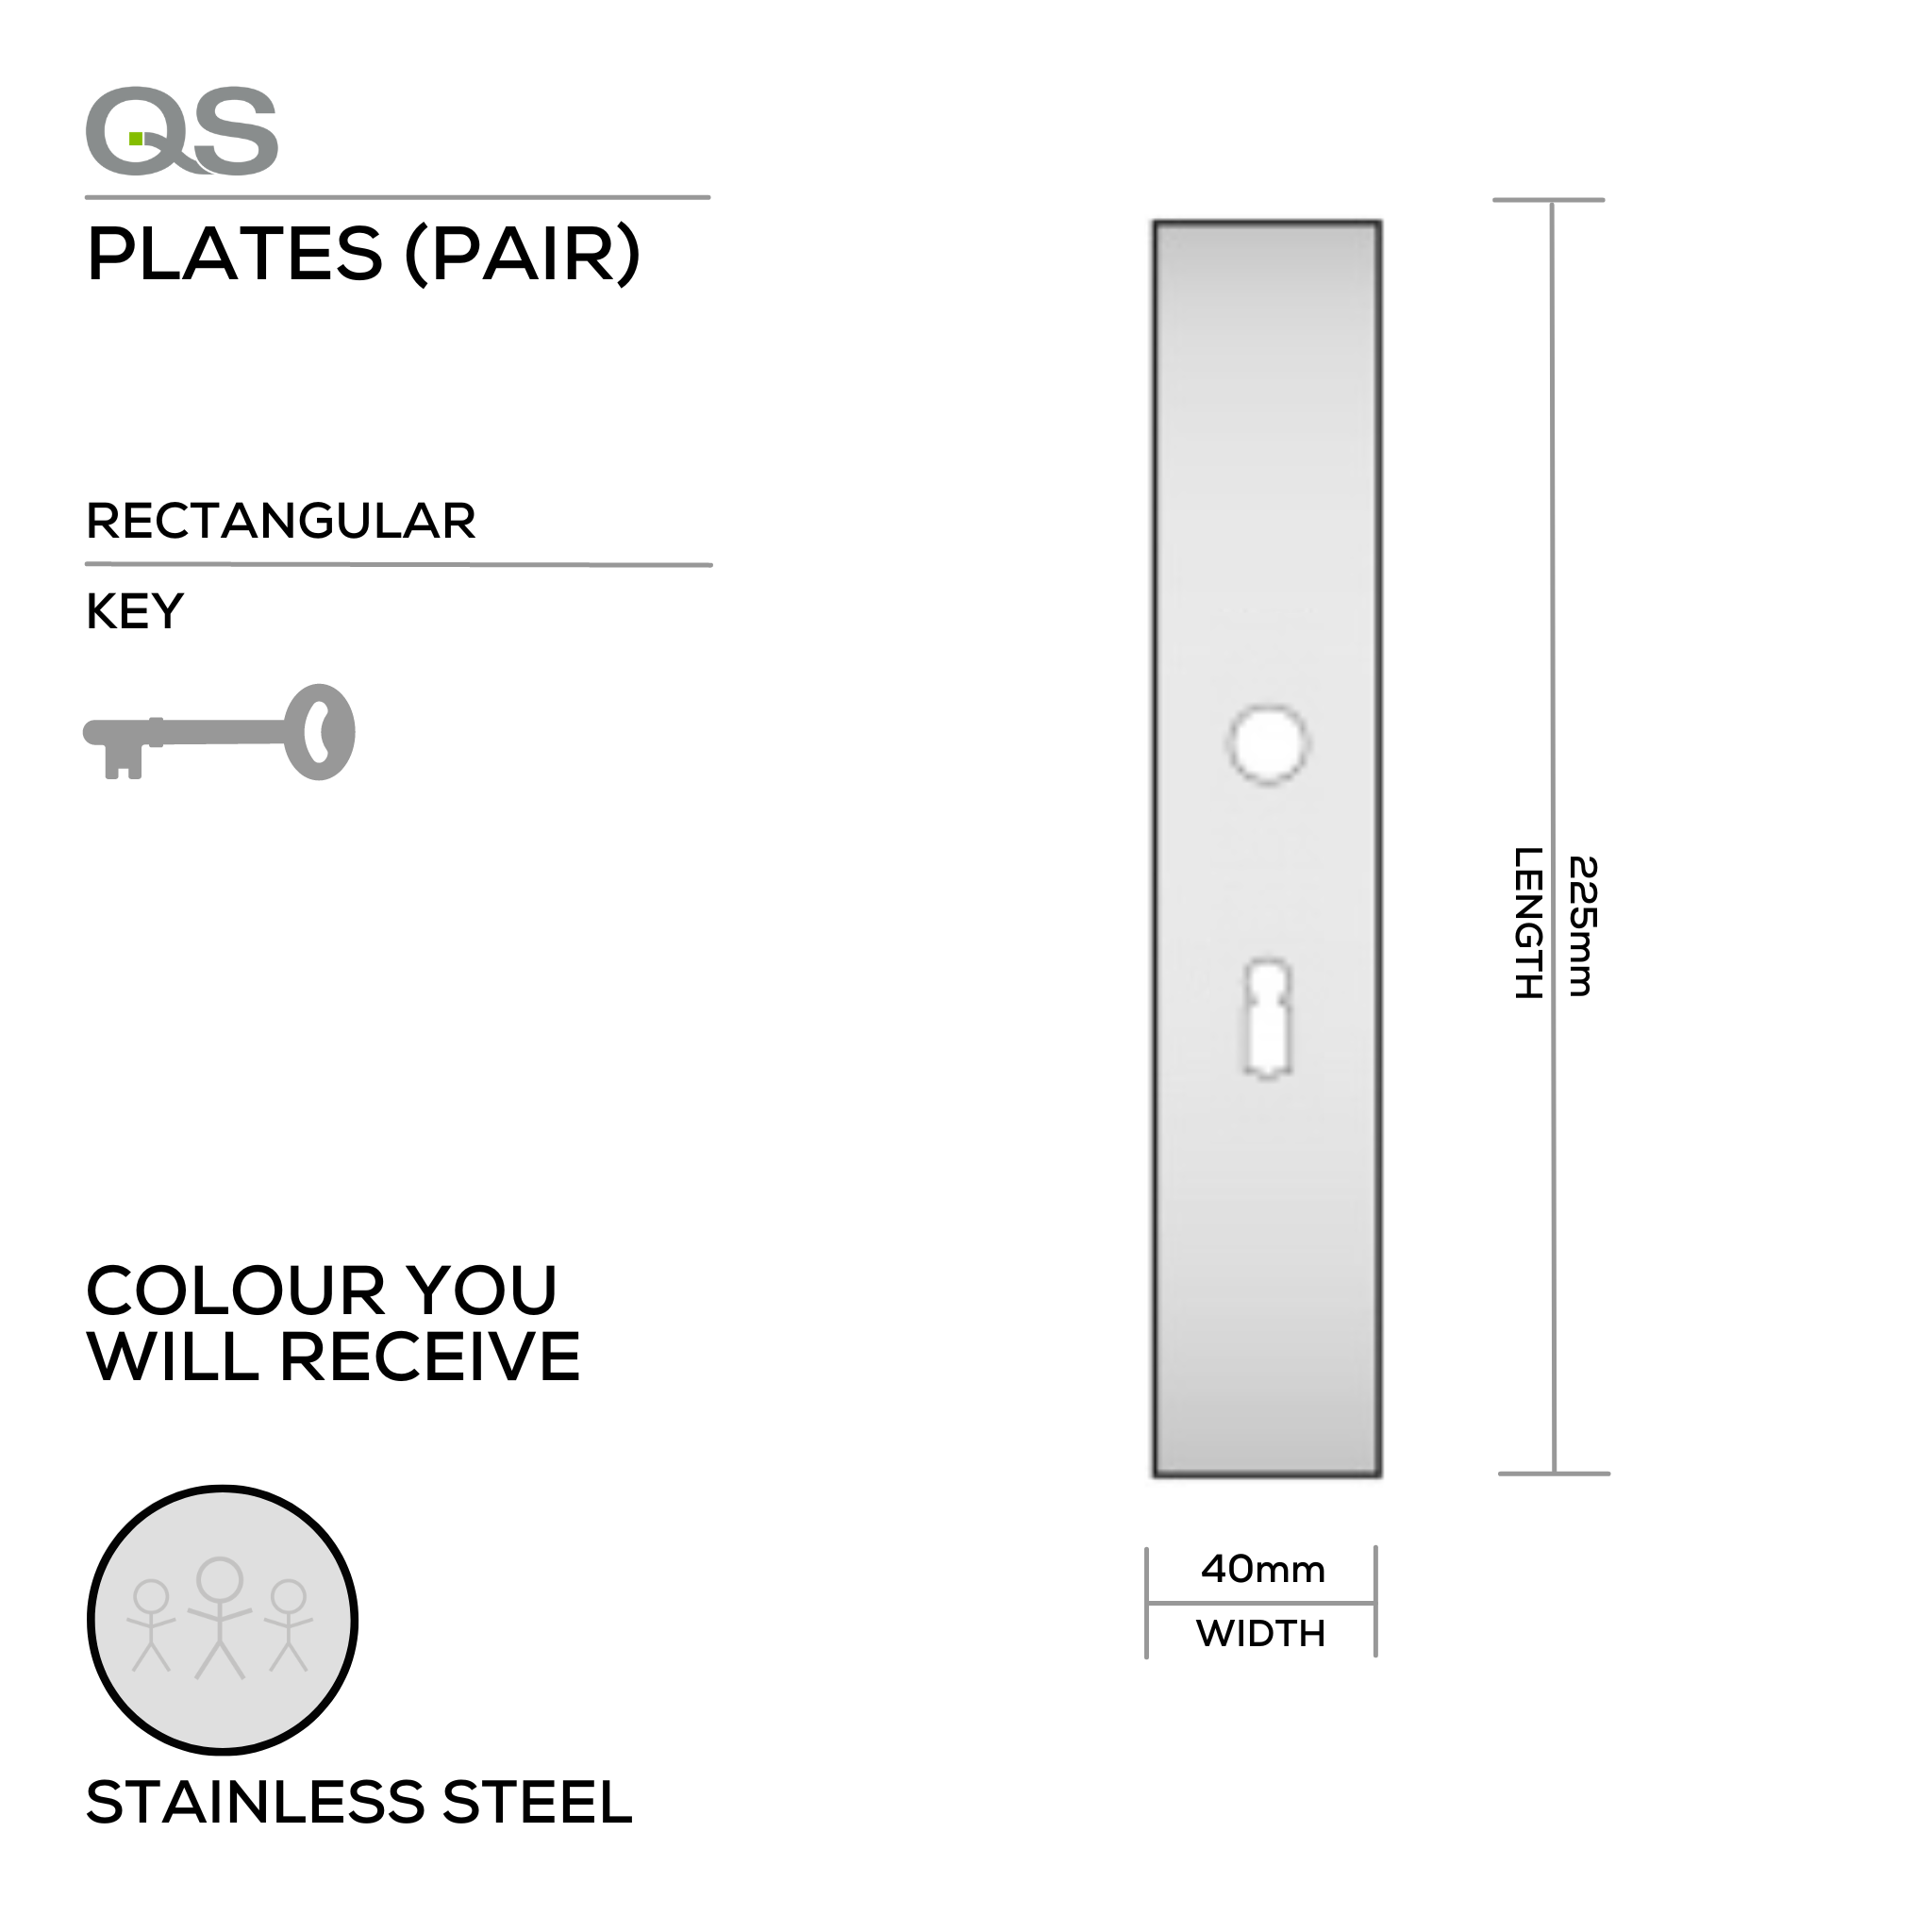 QS4429 KH, Plate, Keyhole, Rectangular, 65mm Centres, 225mm (l) x 40mm (w), Supplied without QS Handle, Stainless Steel, QS